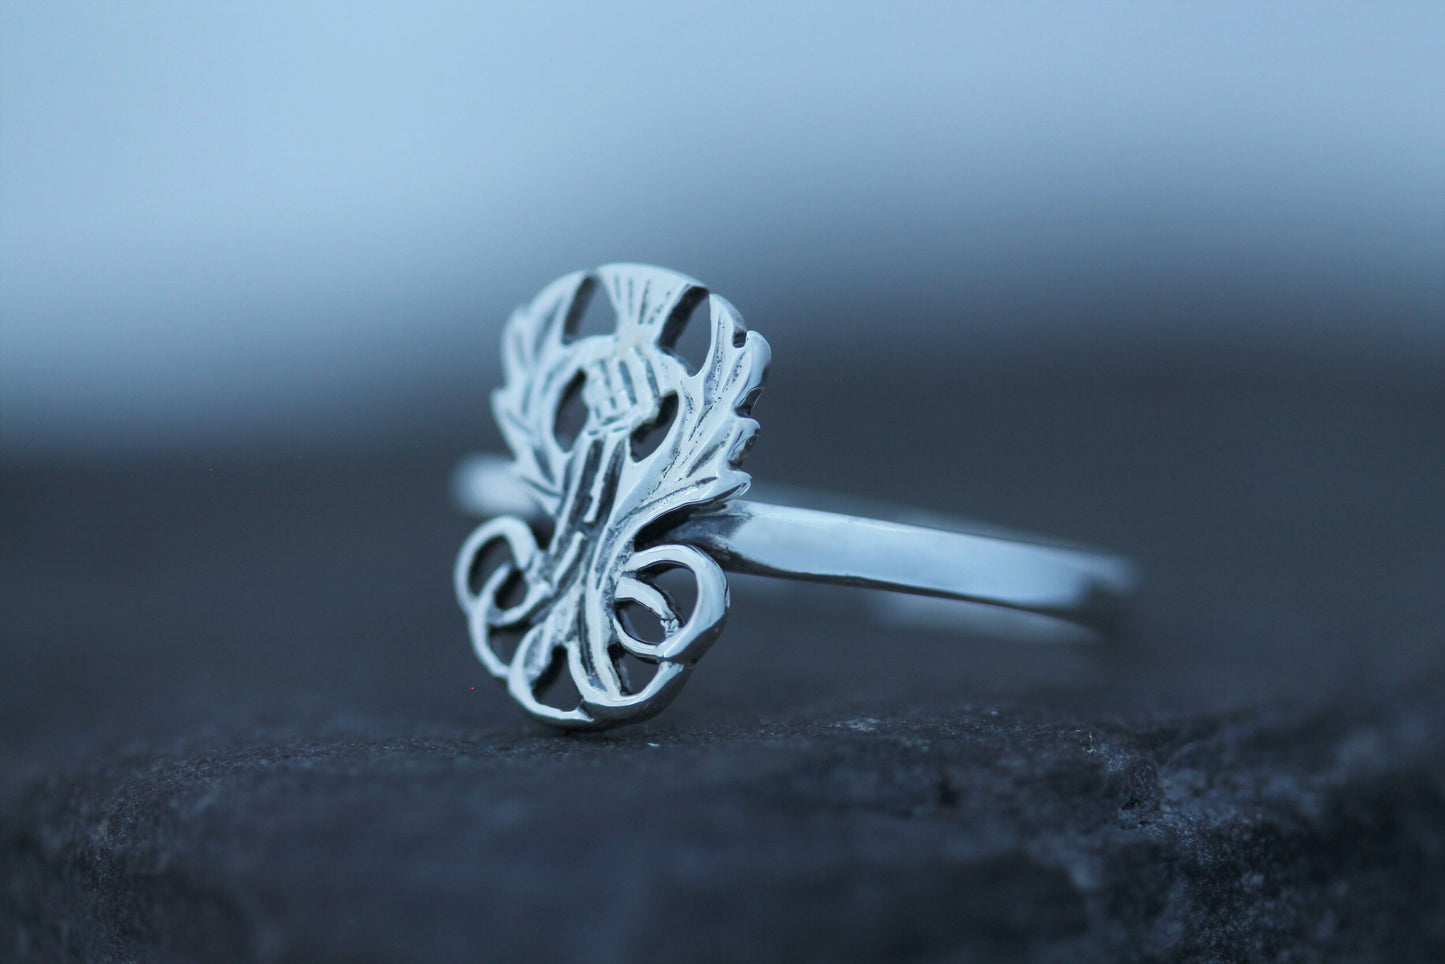 Scottish Thistle Ring - Twisted Roots